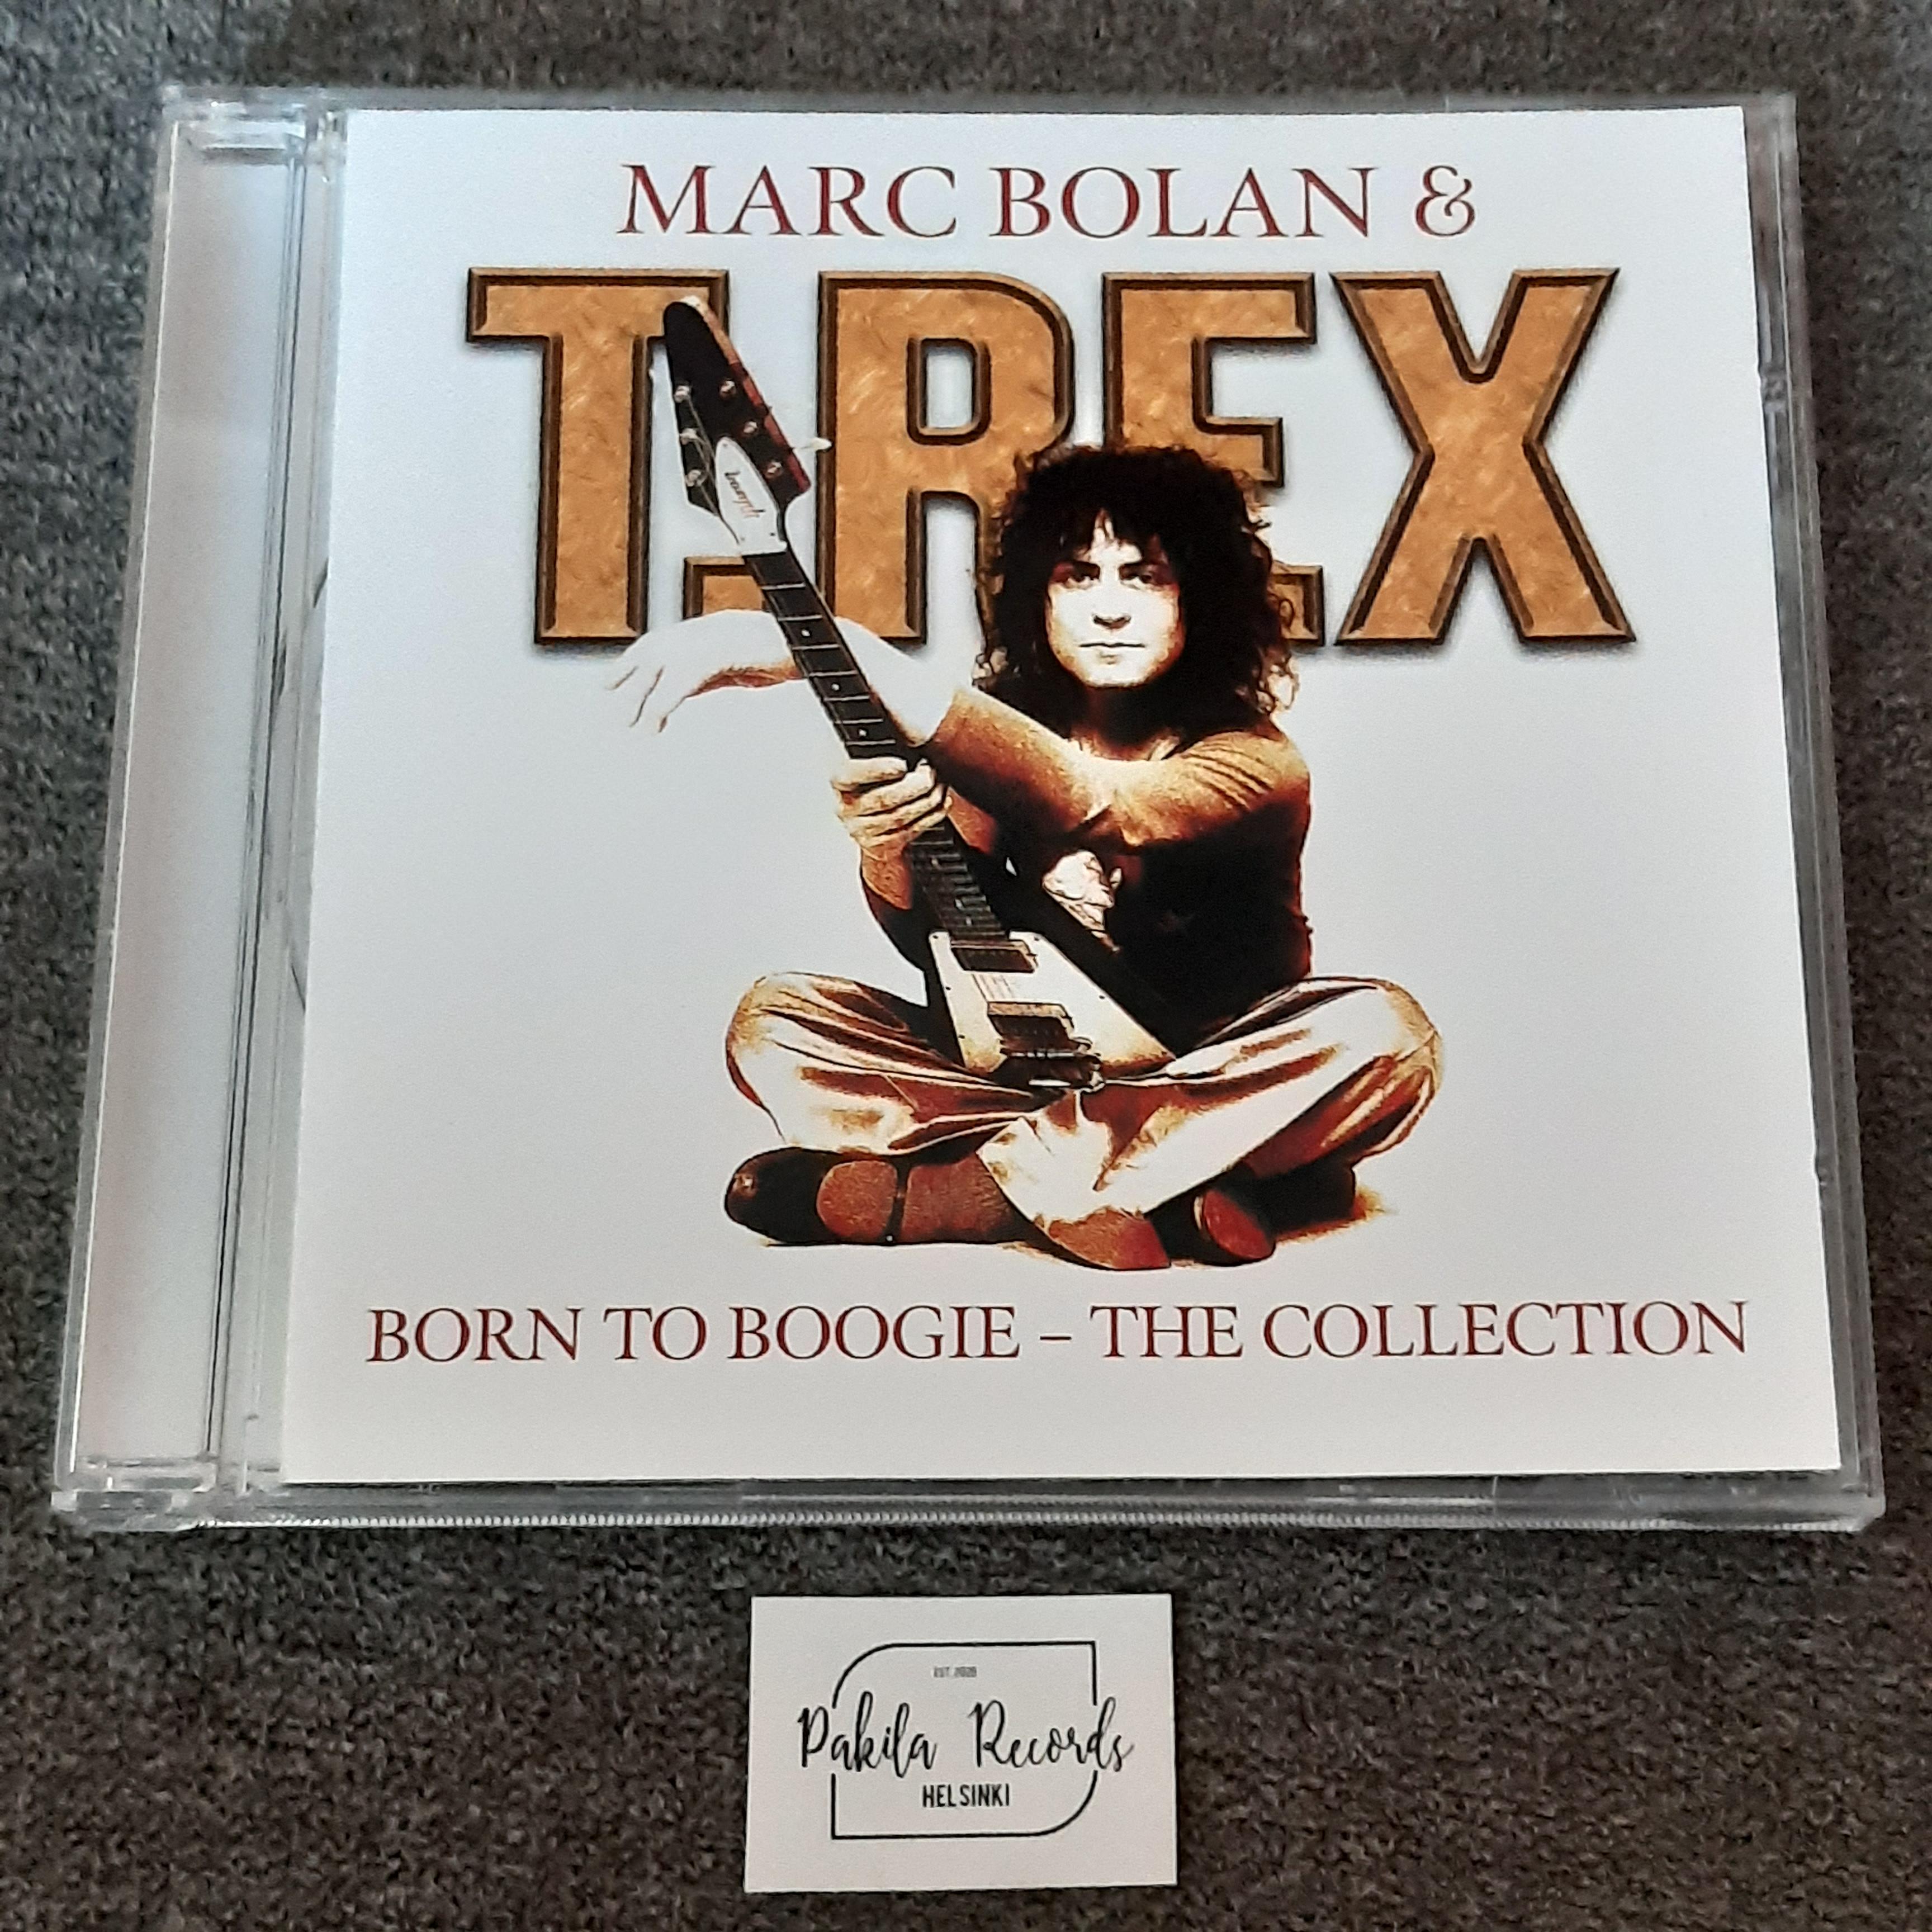 Marc Bolan & T. Rex - Born To Boogie - The Collection - CD (käytetty)